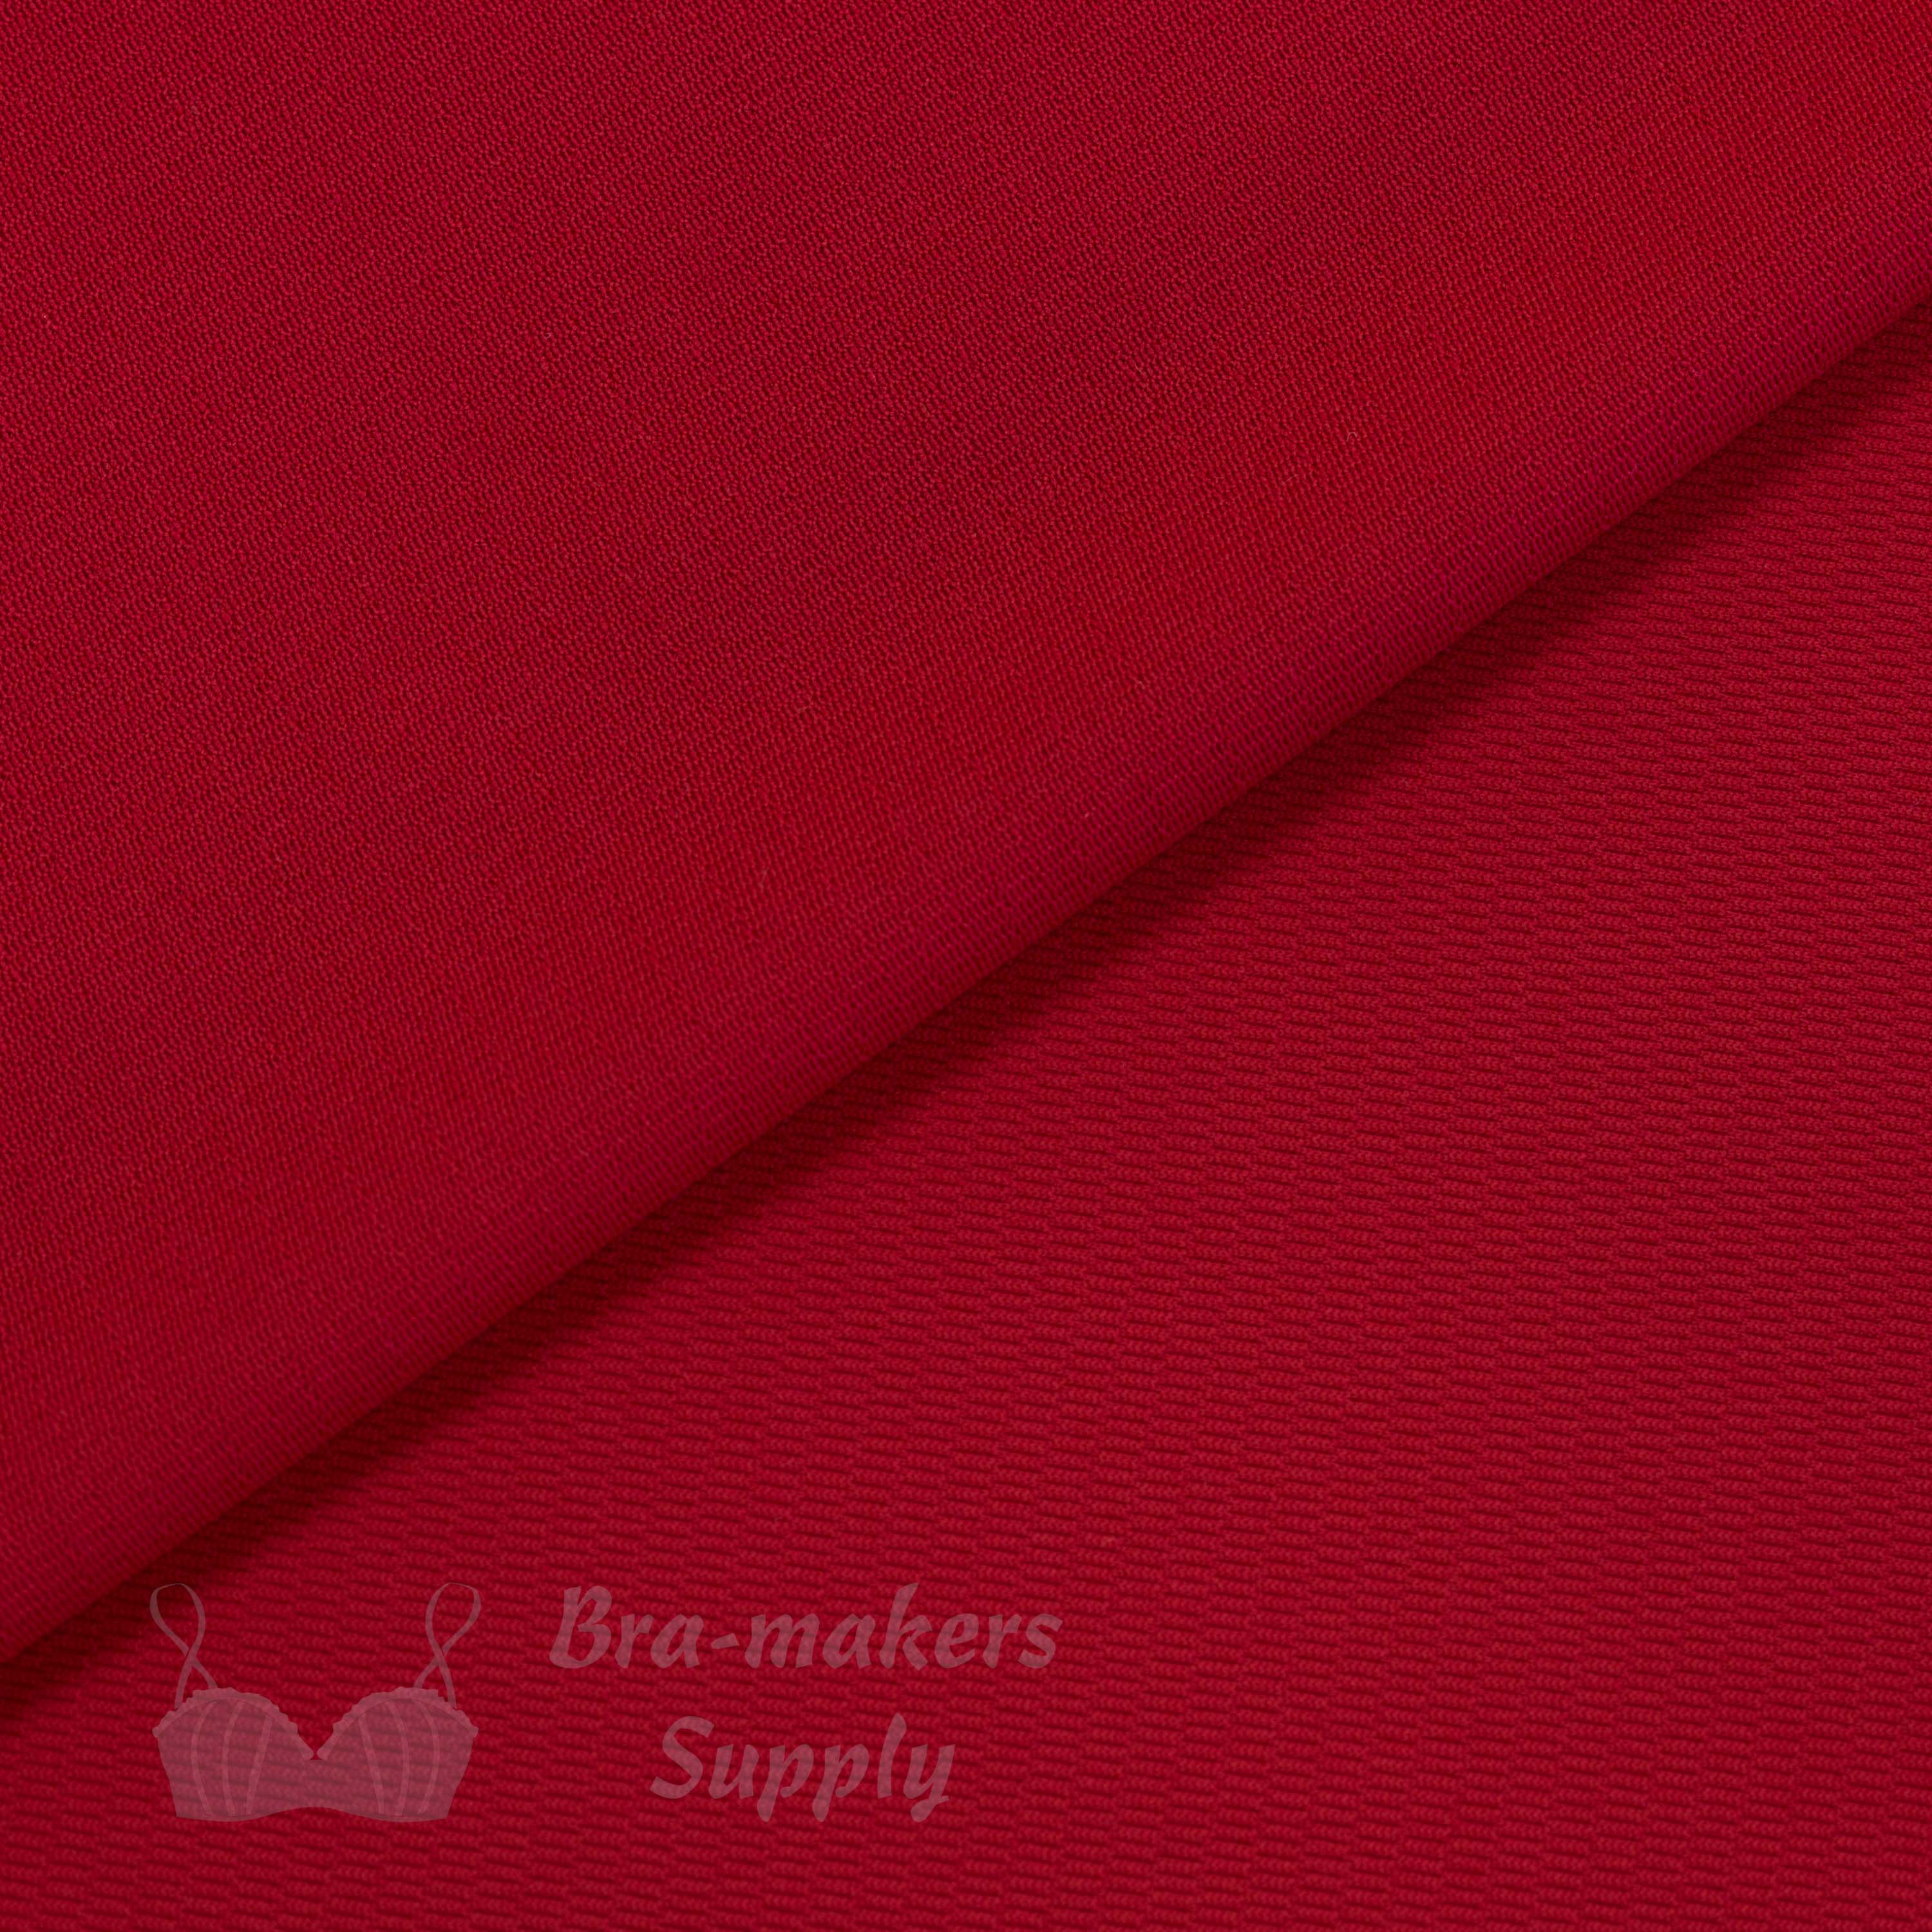 Wickable Anti-Bacterial Stretch Fabric - stay dry - Bra-Makers Supply